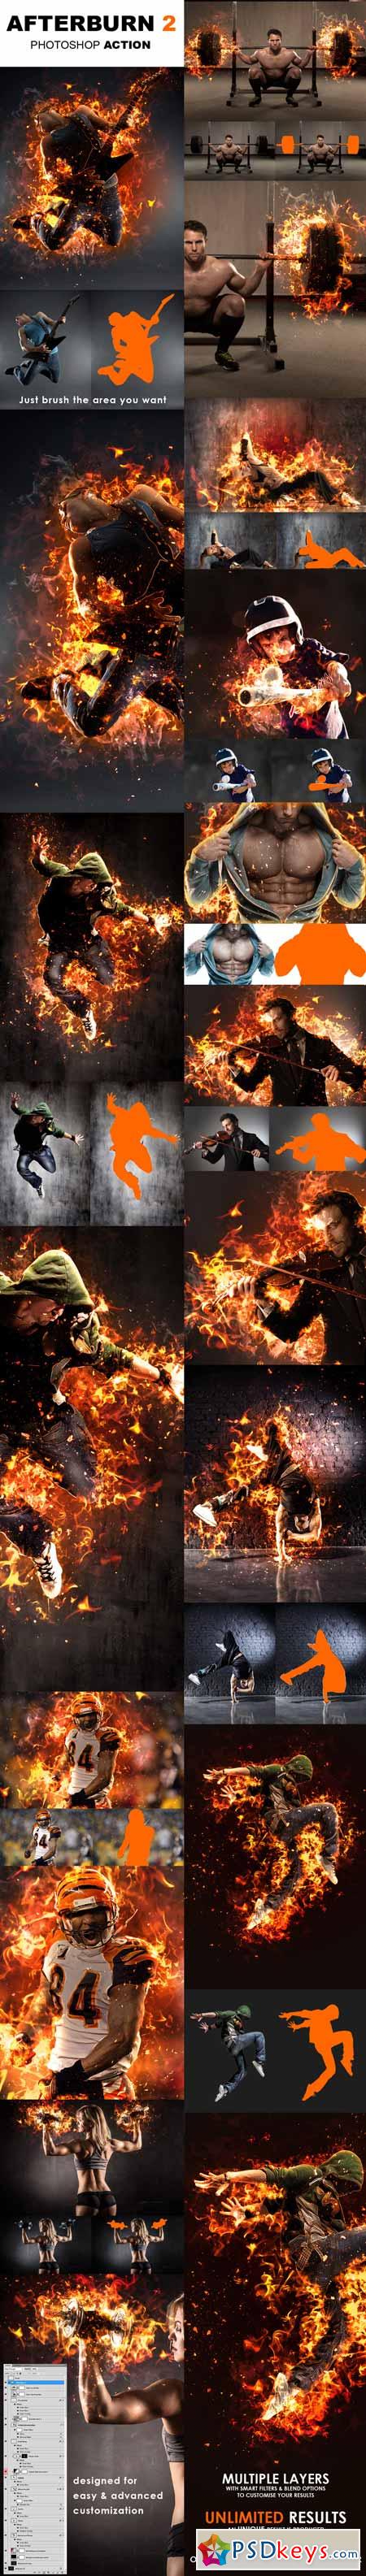 afterburn 2 photoshop action download